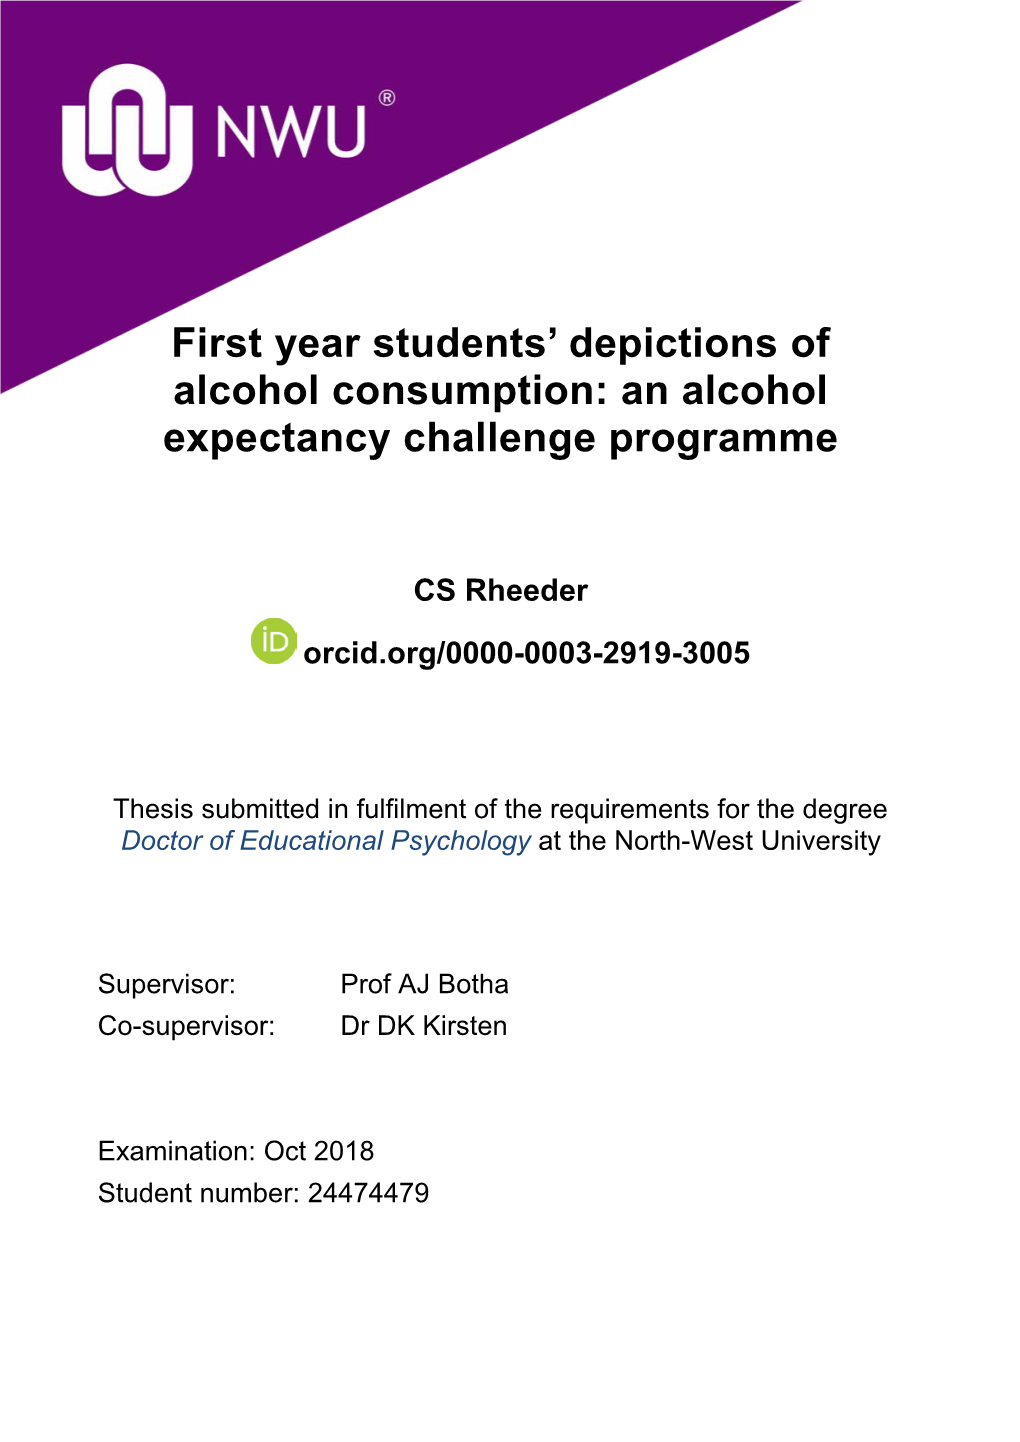 First Year Students' Depictions of Alcohol Consumption